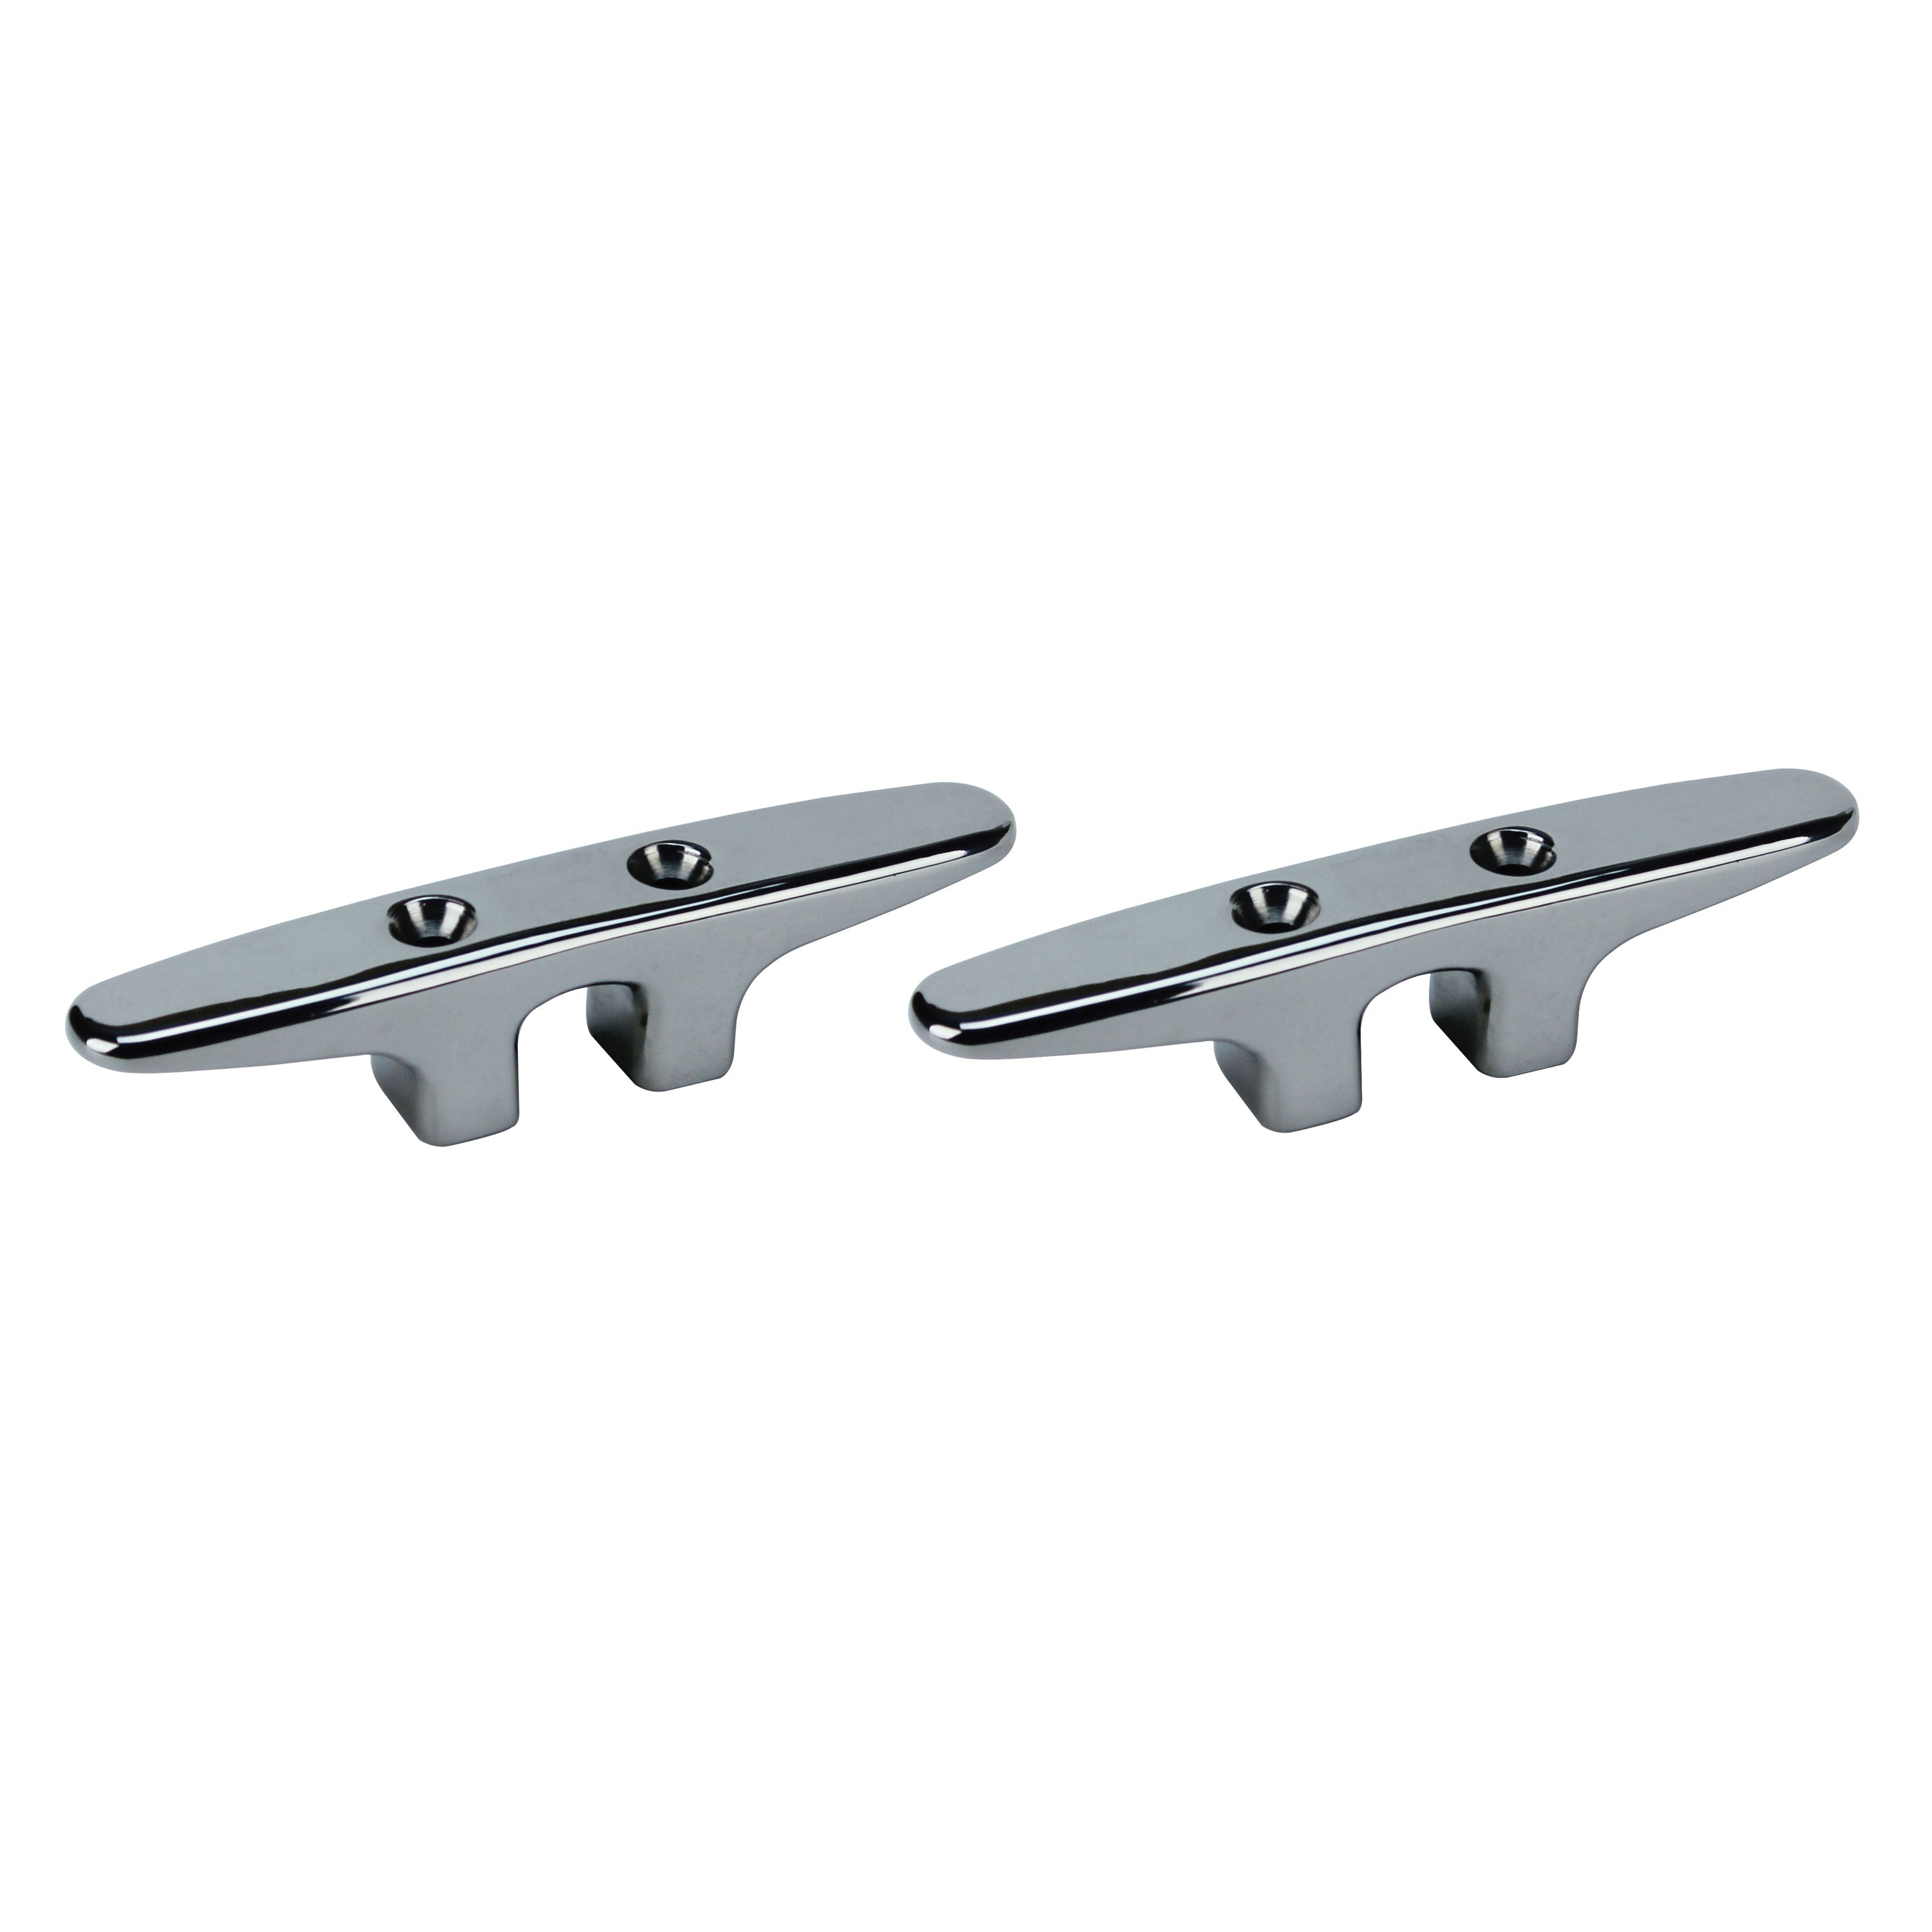 Extreme Max 3006.6762.2 Soft Point Stainless Steel Dock Cleat - 6", Value 2-Pack